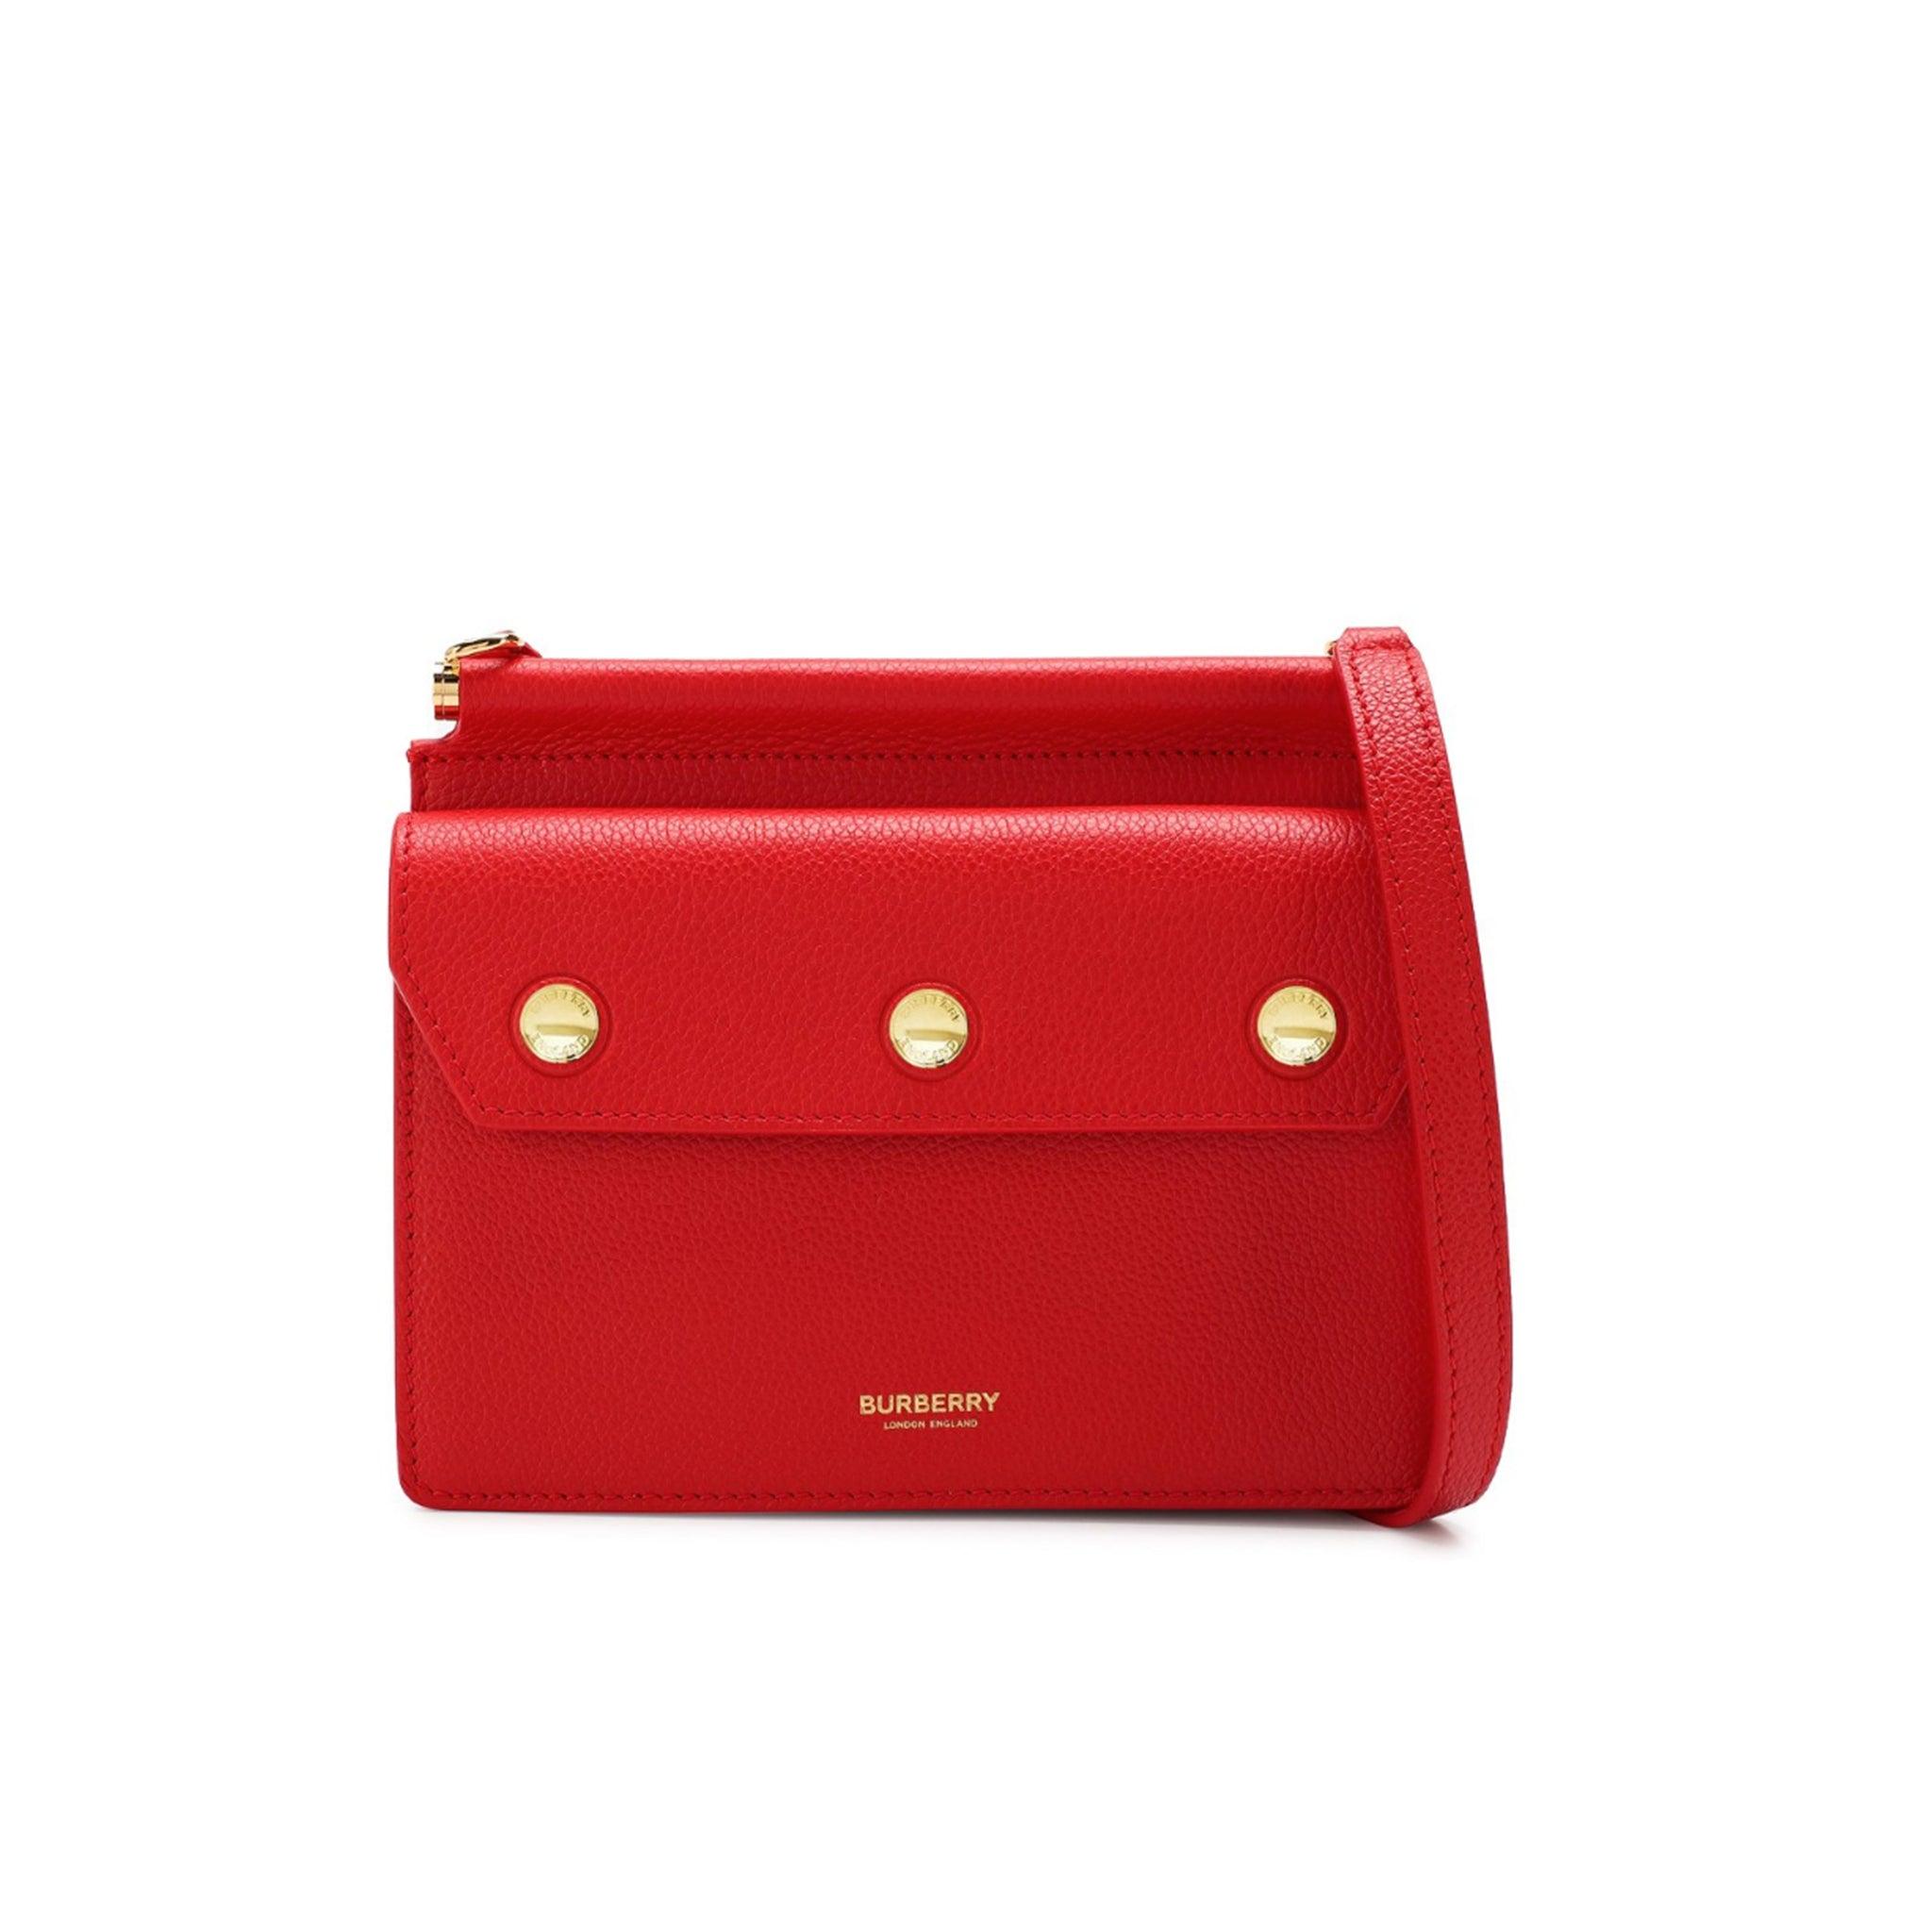 Burberry Mini Leather Title Bag in Red - Save 43% | Lyst